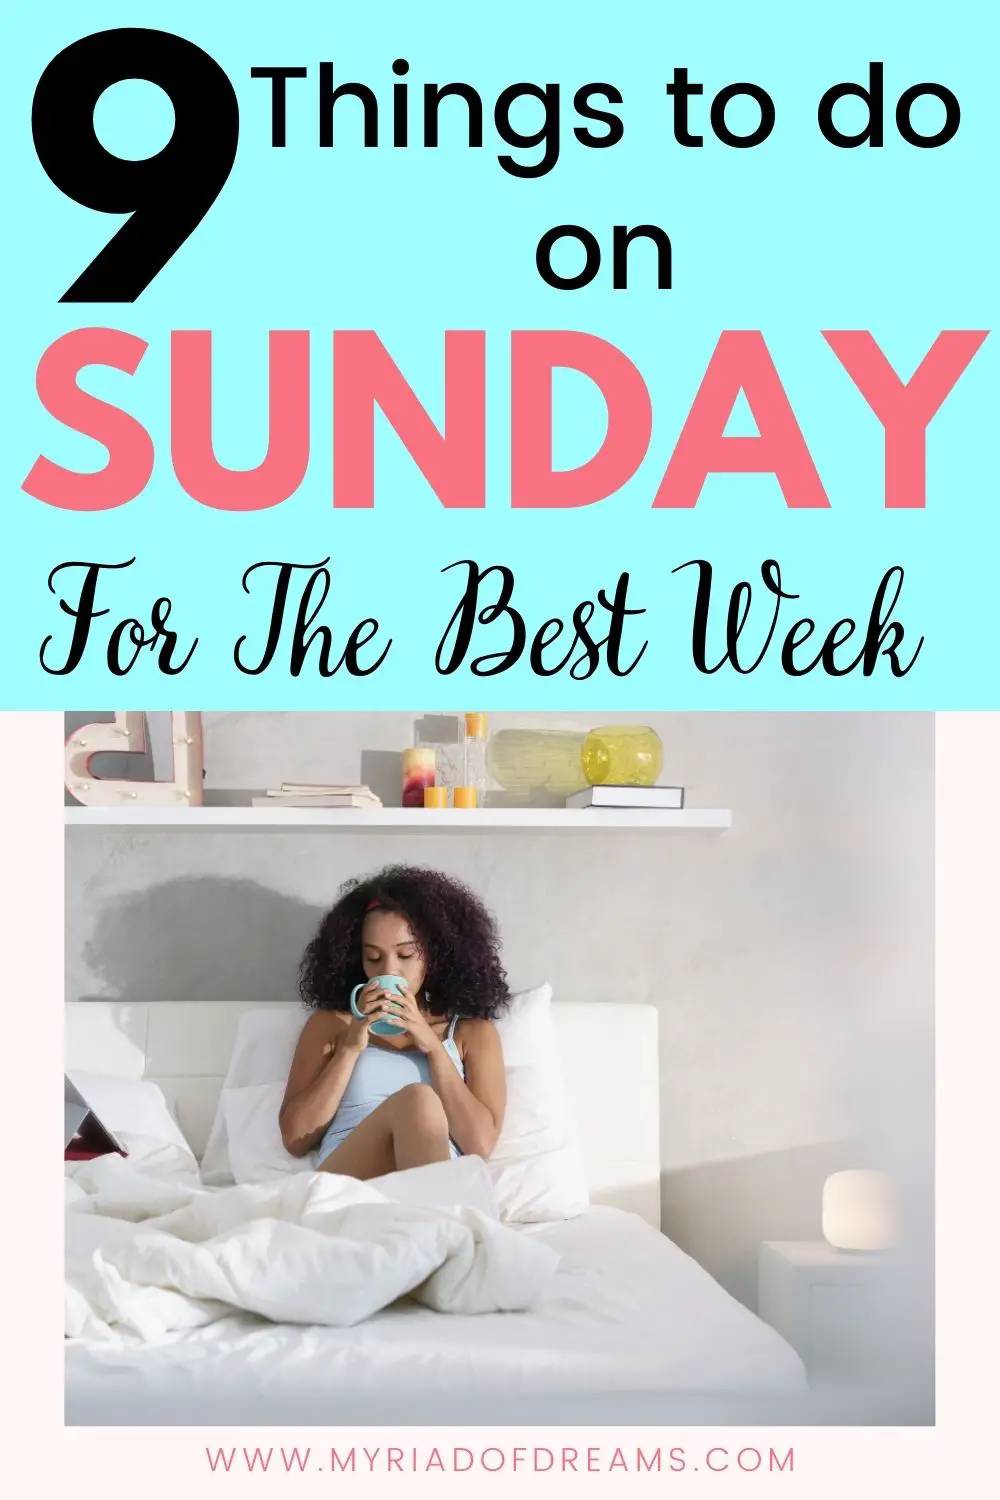 Things to do on Sunday for a better week. Try these Sunday habits for a productive week